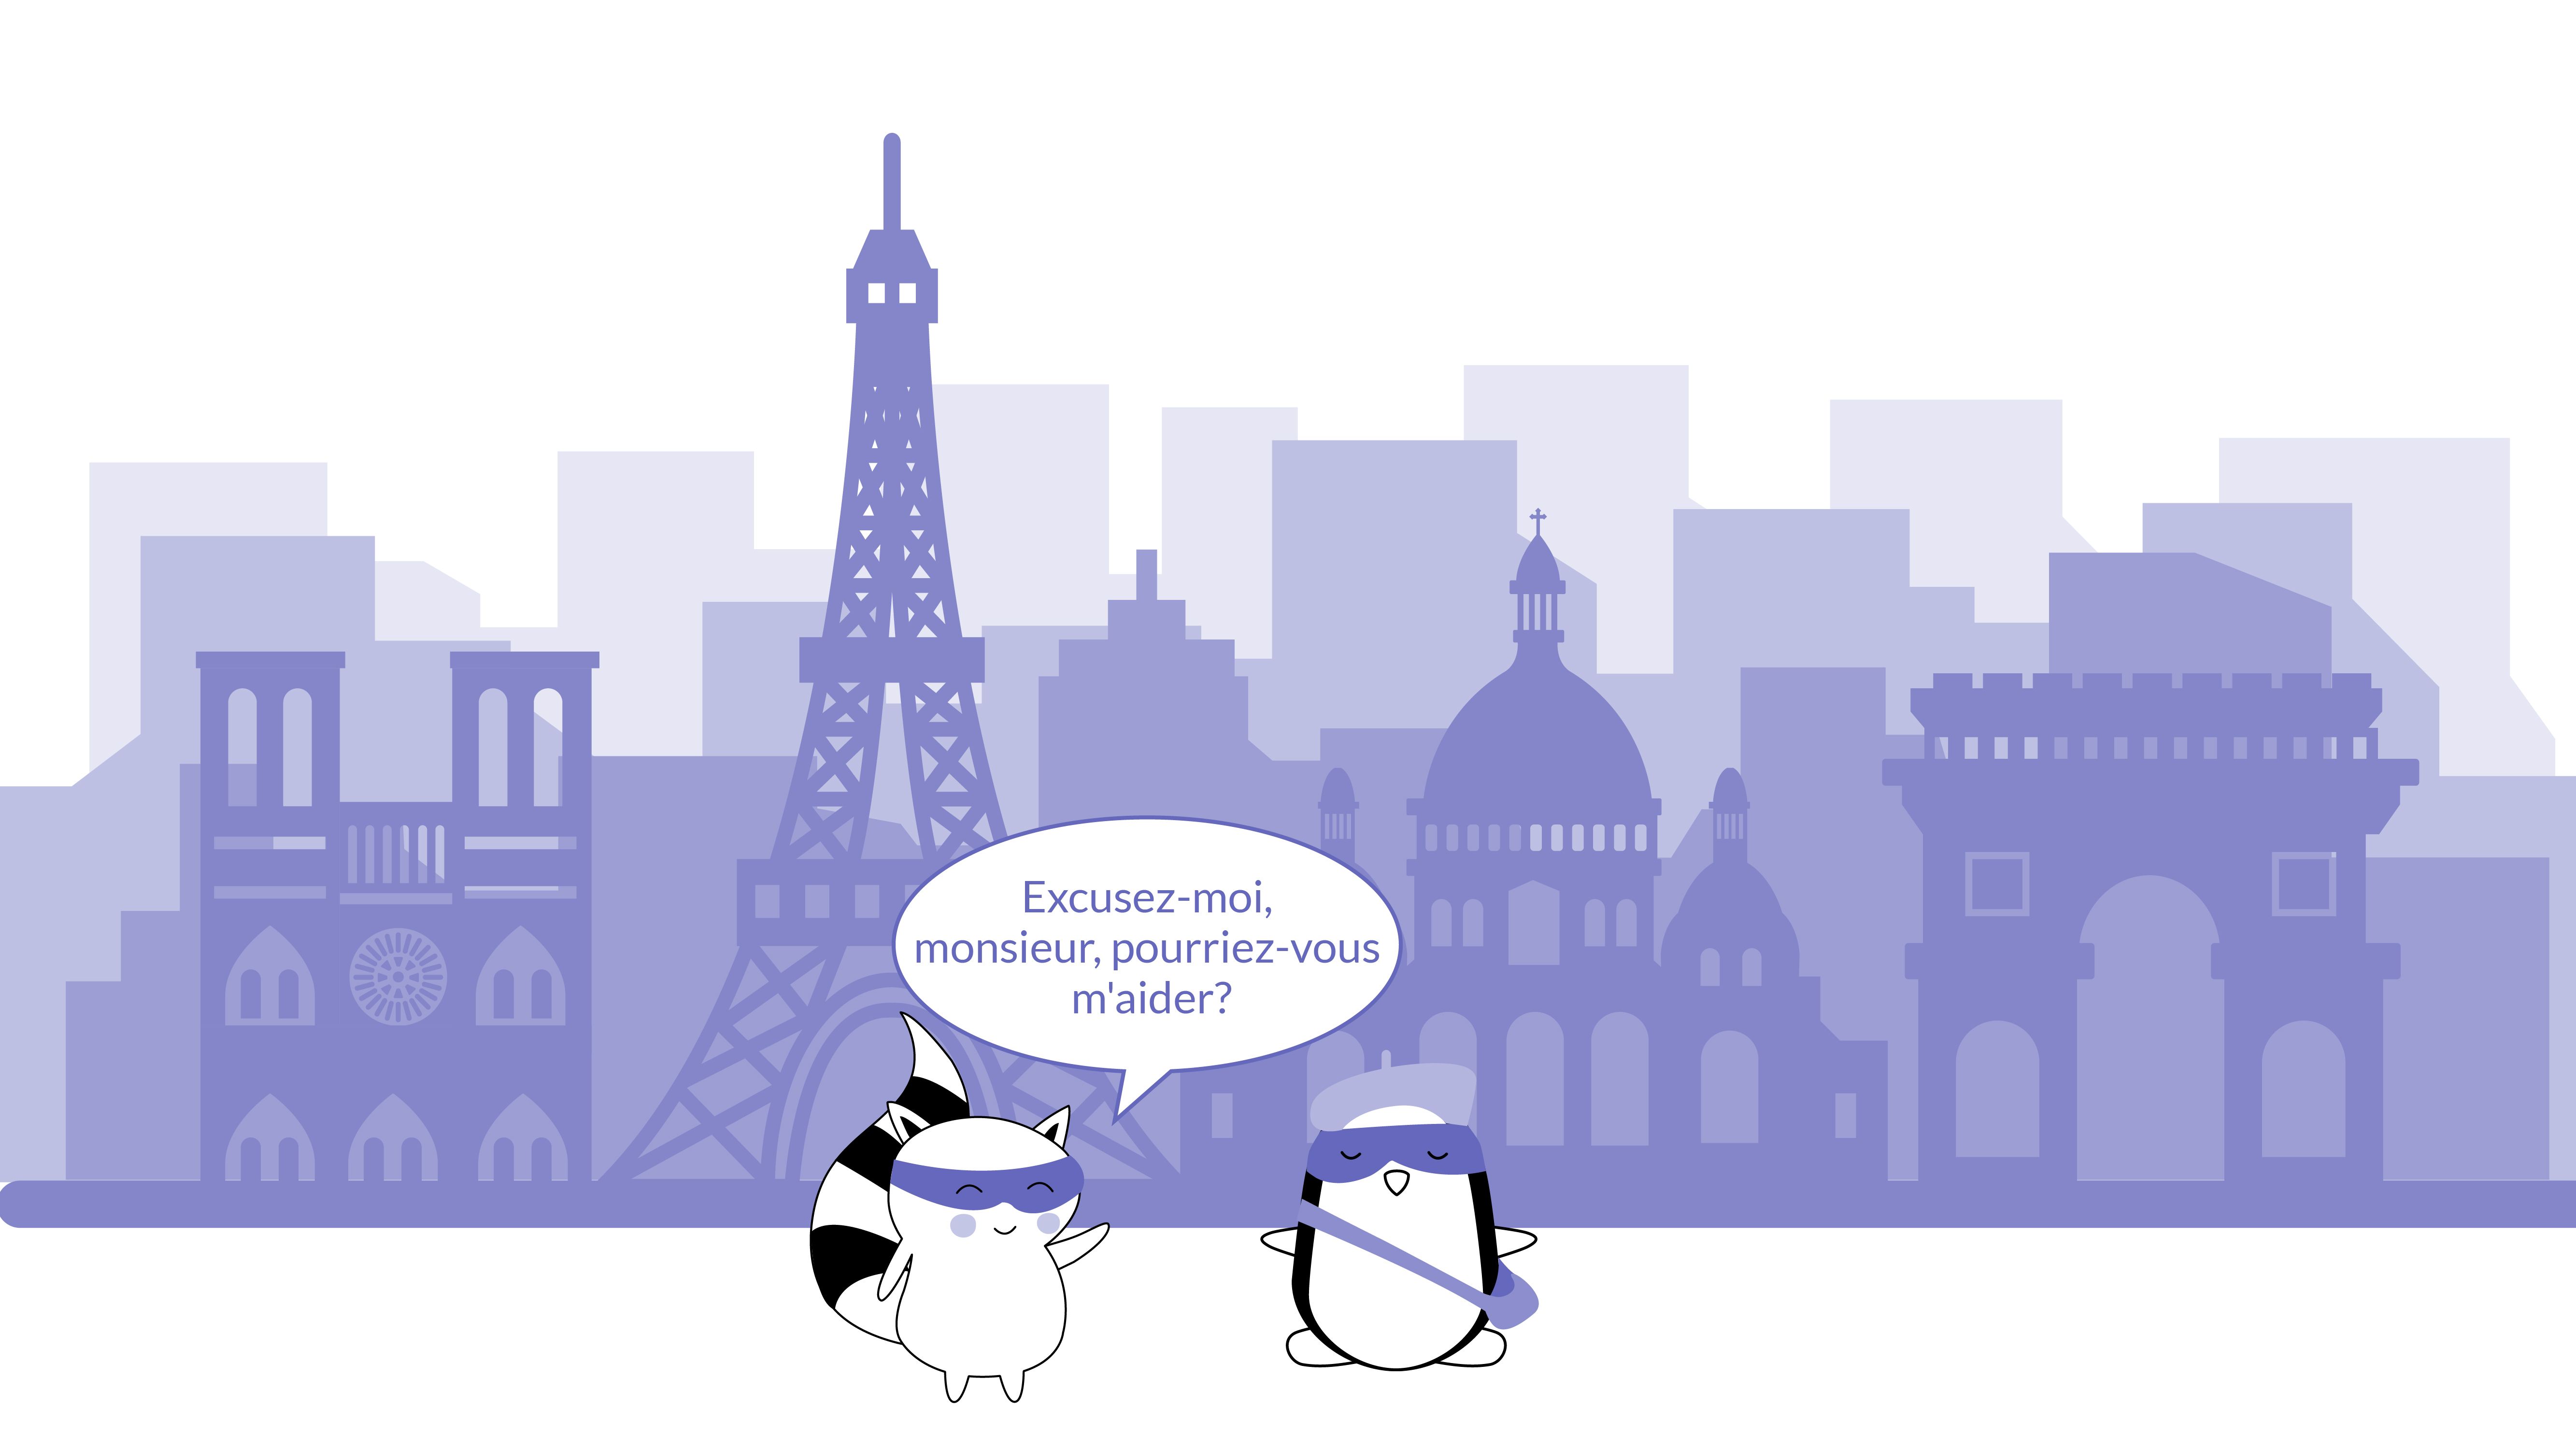 Benji is lost in Paris, he stops Pocky on the street, saying, “Excusez-moi, monsieur, pourriez-vous m'aider?”